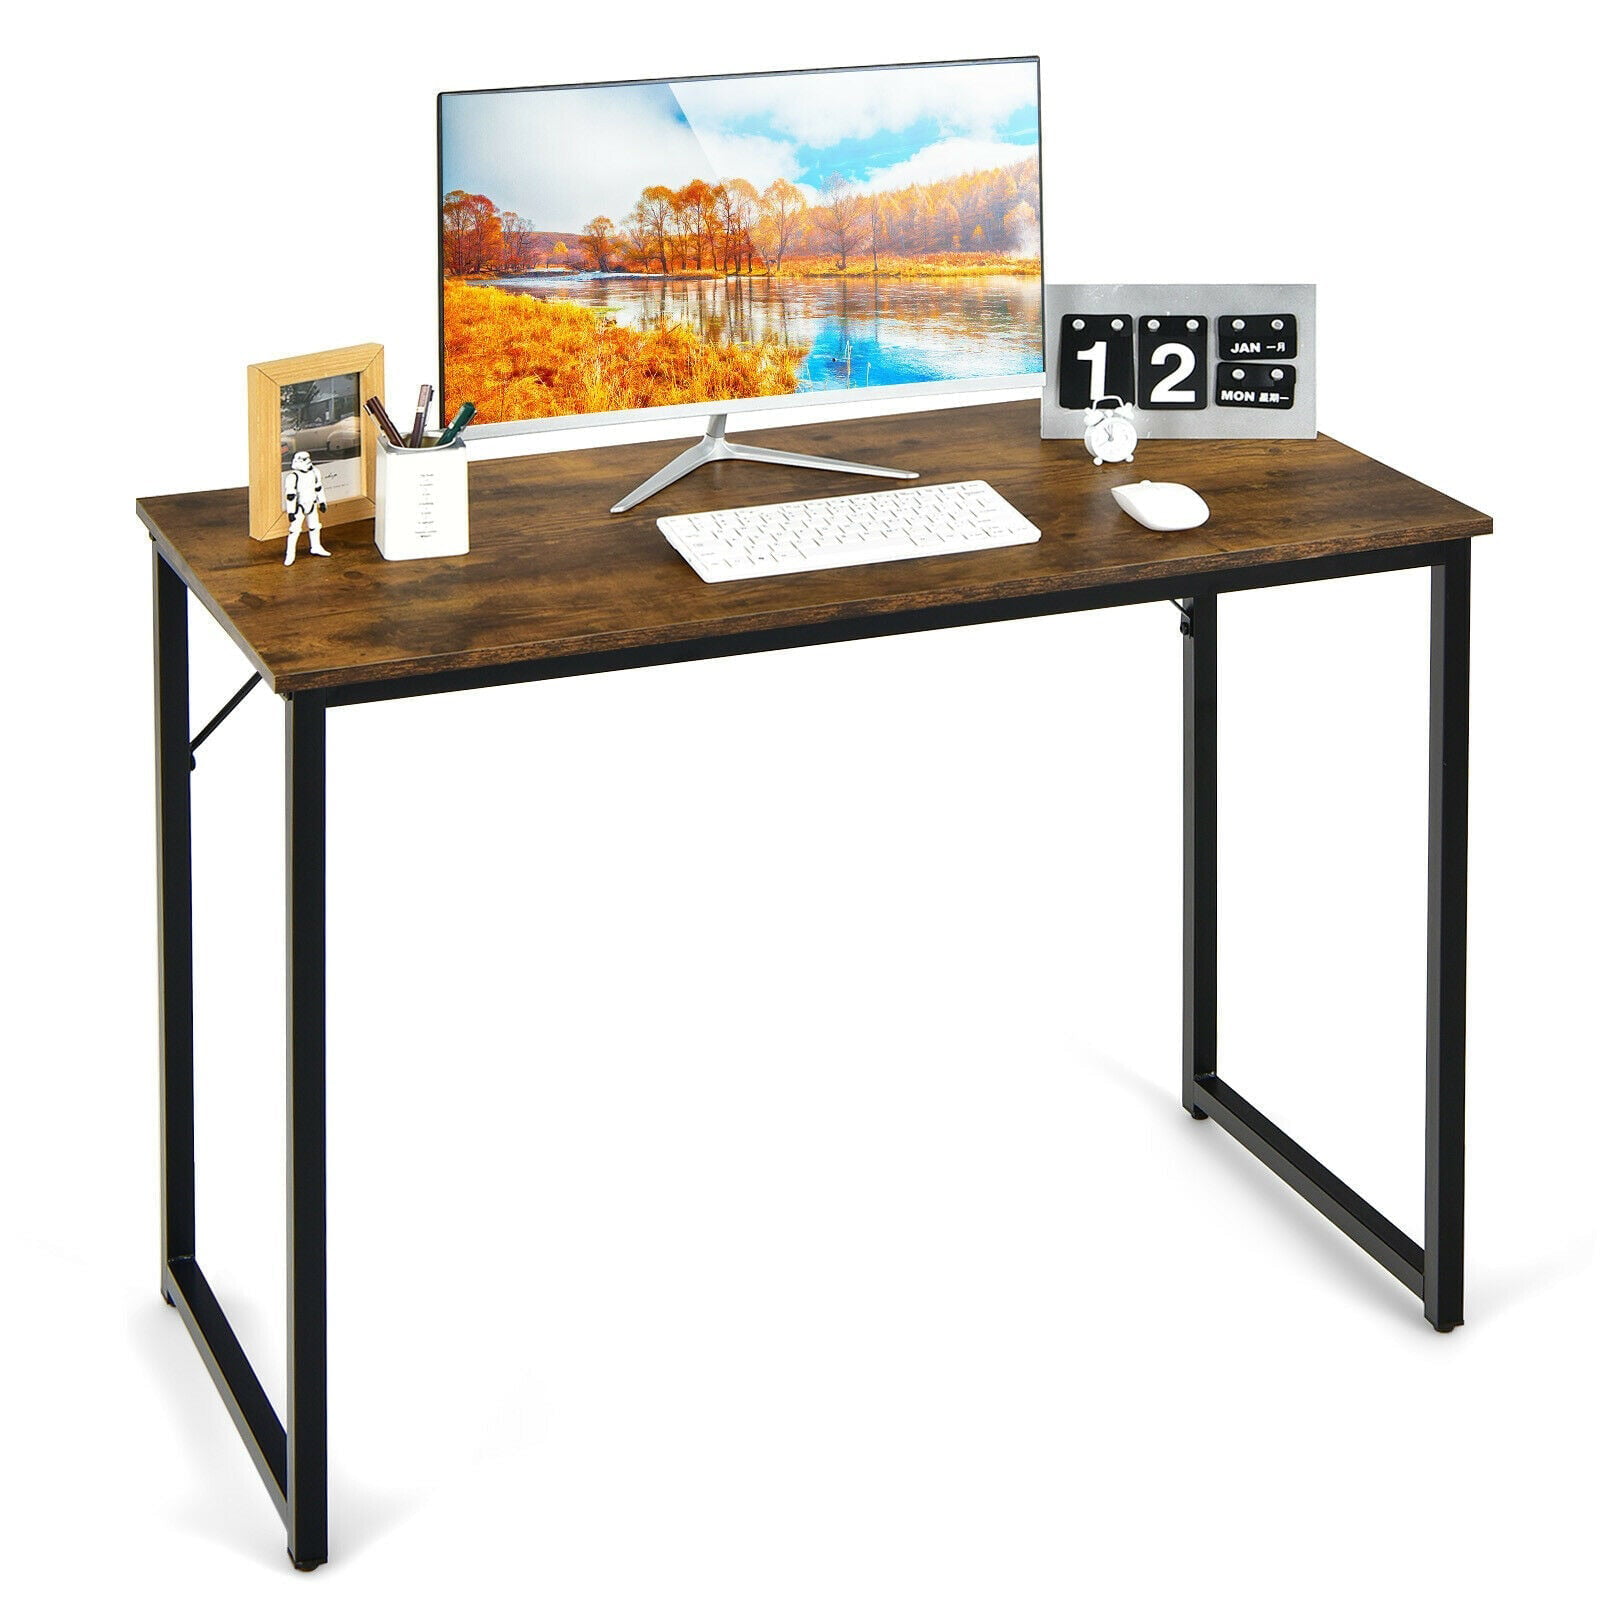 PayLessHere 47 inch Computer Desk Modern Writing Desk, Simple Study Table,  Industrial Office Desk, Sturdy Laptop Table for Home Office, Nature